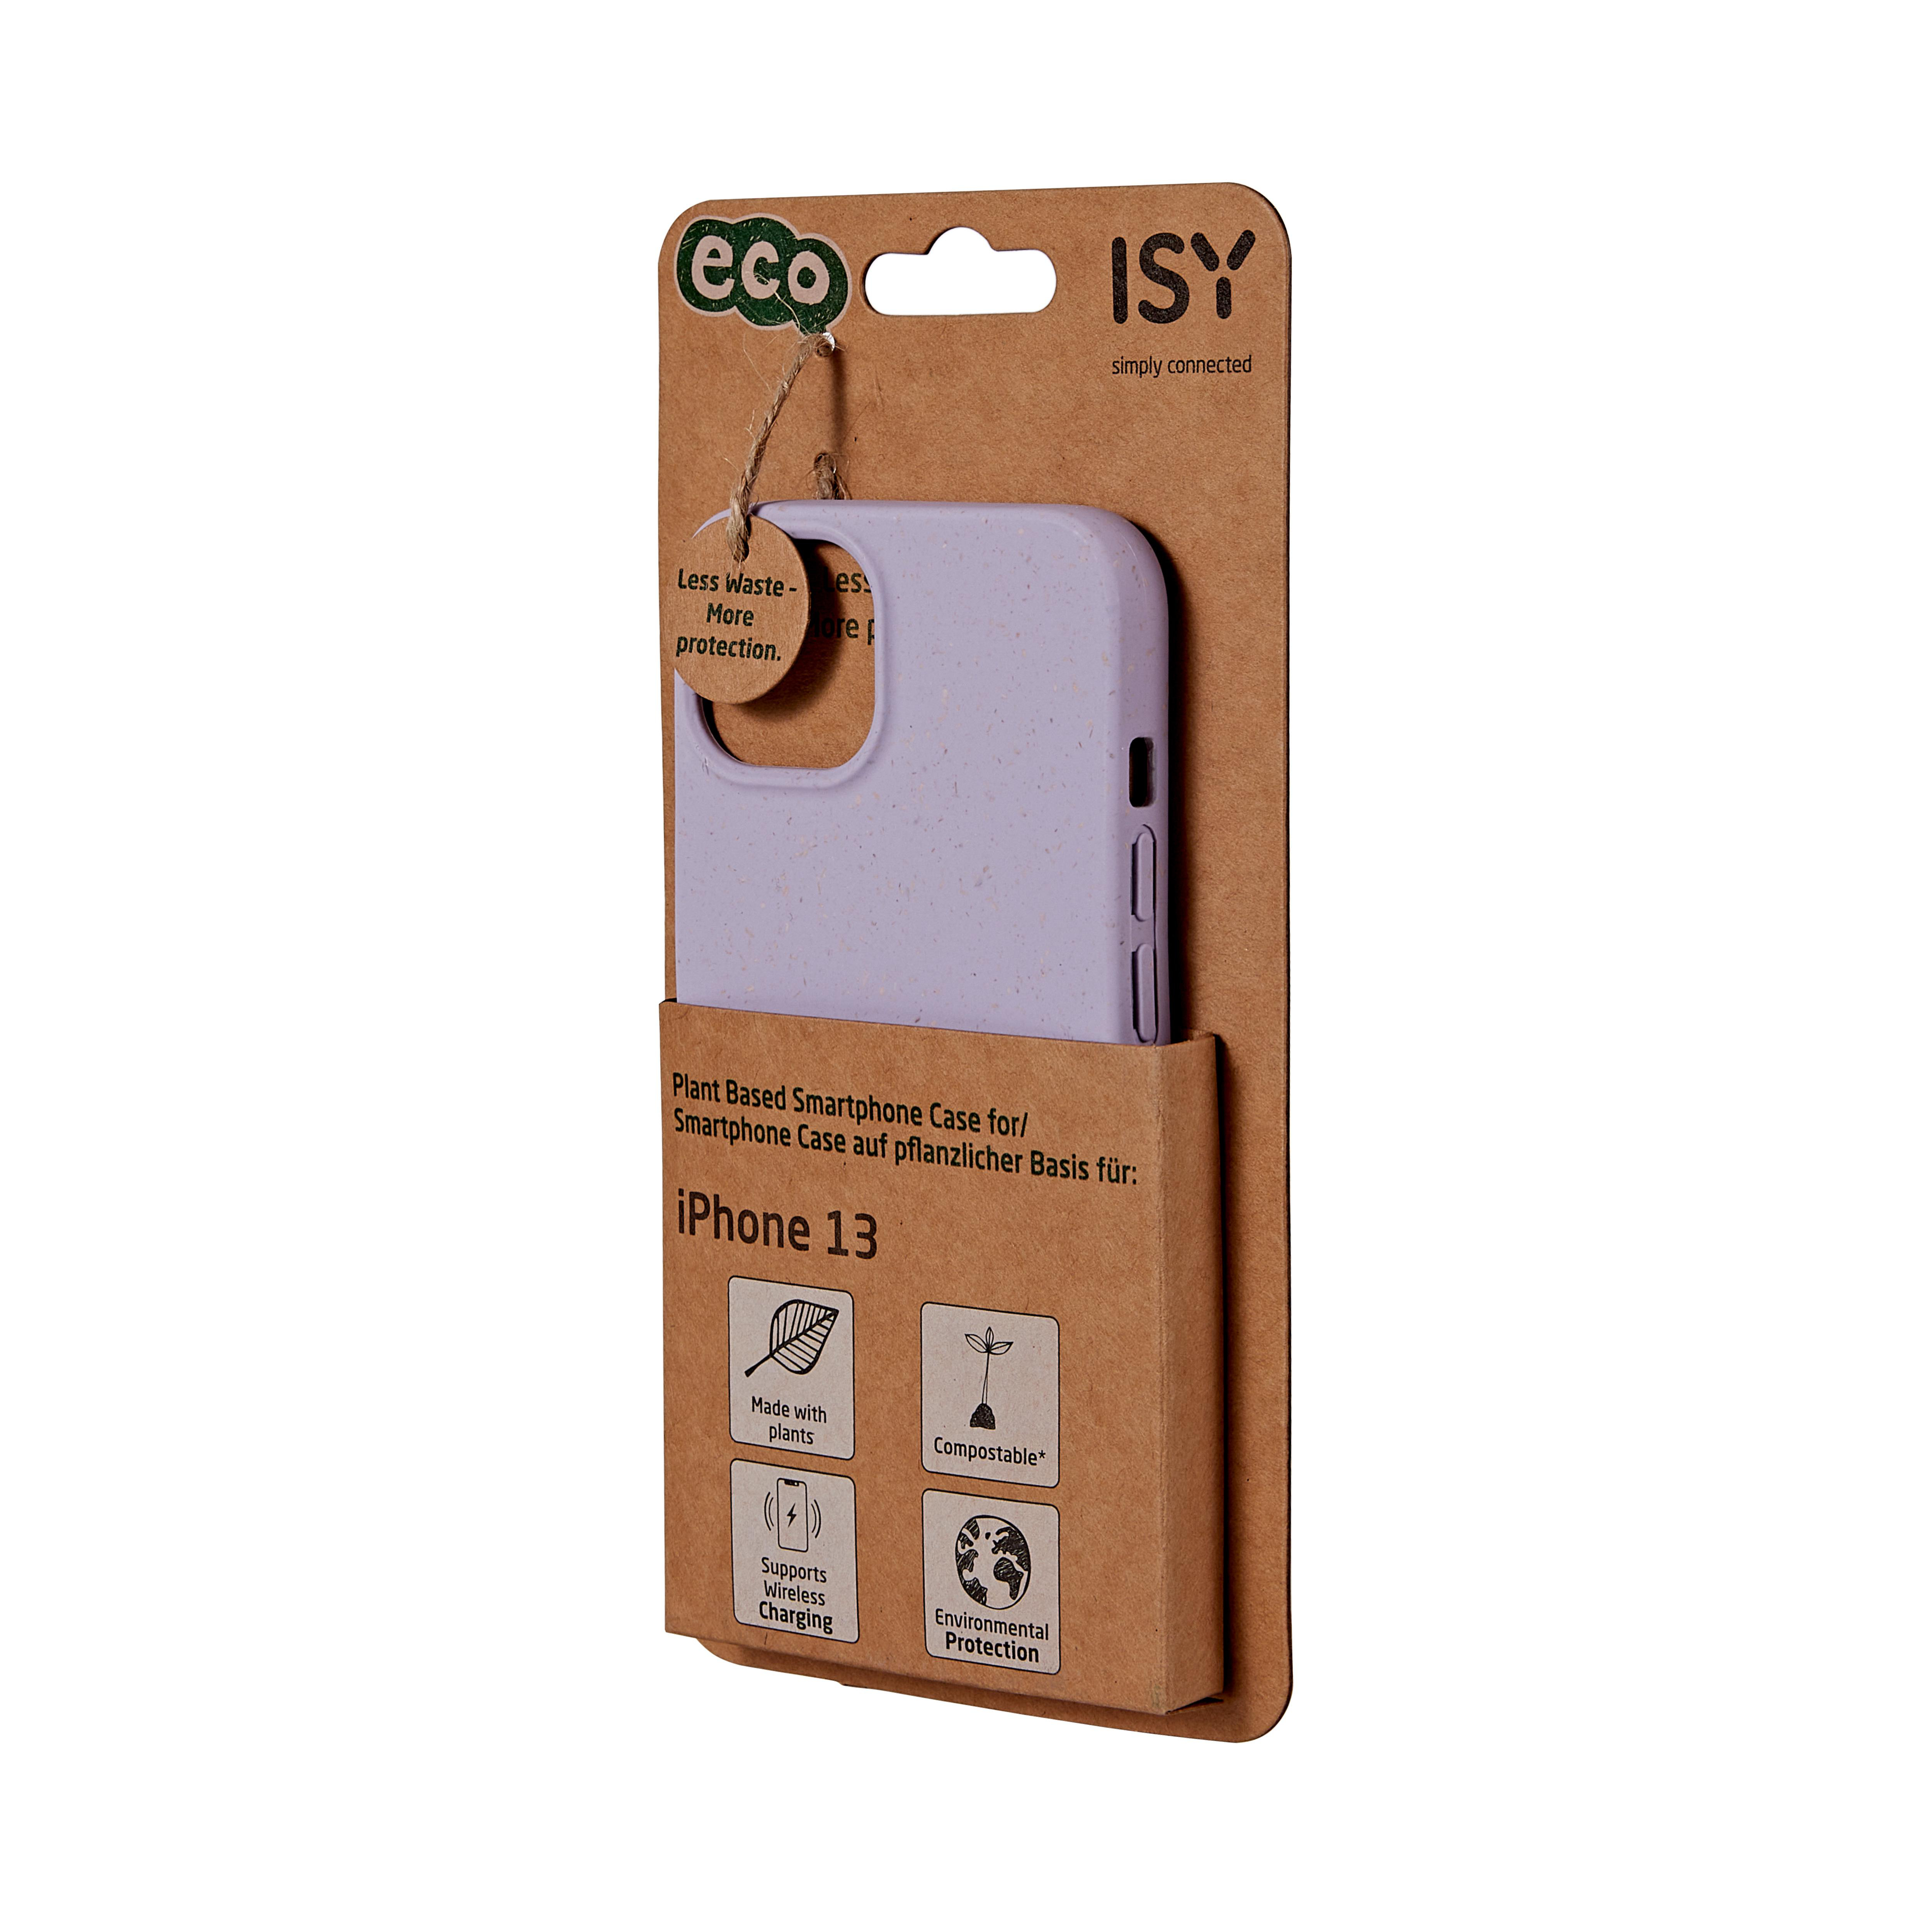 Backcover, ISY 13, iPhone BioCase, ISC-6009, Apple, Violett